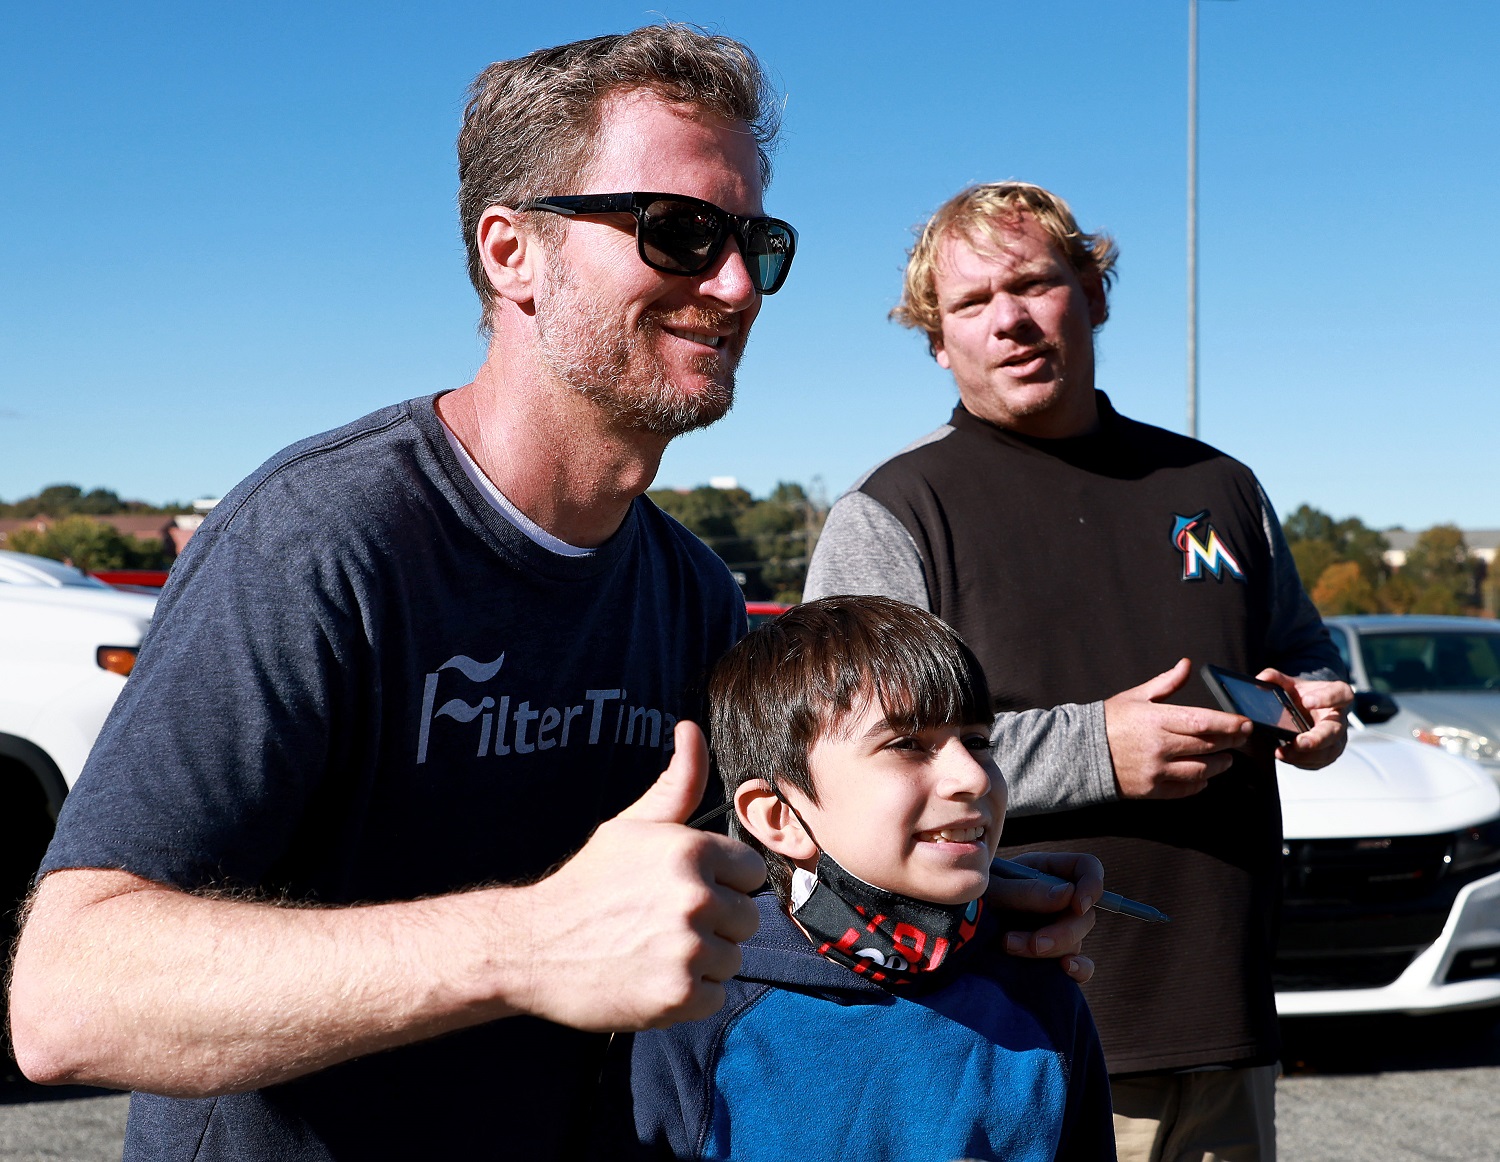 Dale Earnhardt Jr. greets fans after a testing session with the NASCAR Next Gen car at Bowman Gray Stadium on Oct. 26, 2021, in Winston-Salem, North Carolina.